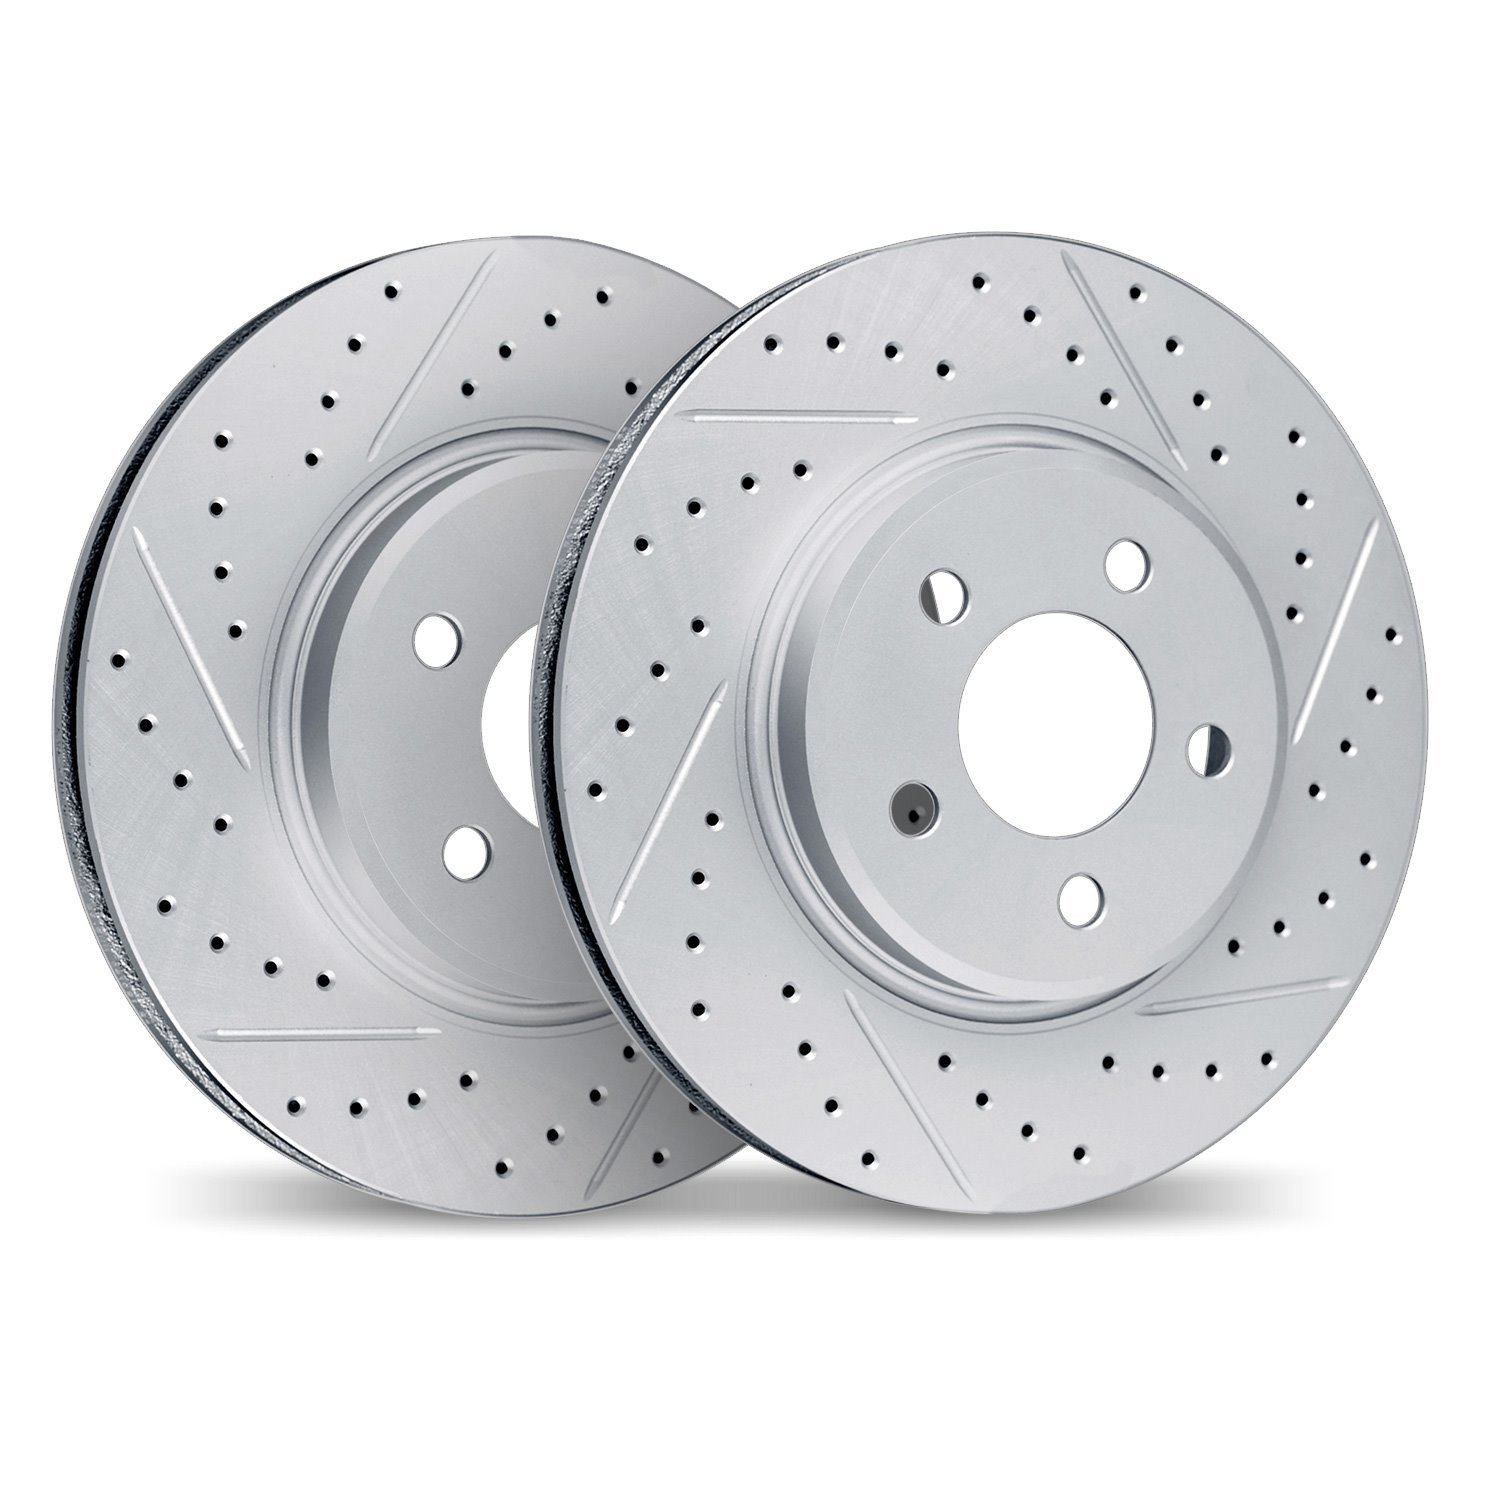 2002-13003 Geoperformance Drilled/Slotted Brake Rotors, Fits Select Subaru, Position: Front